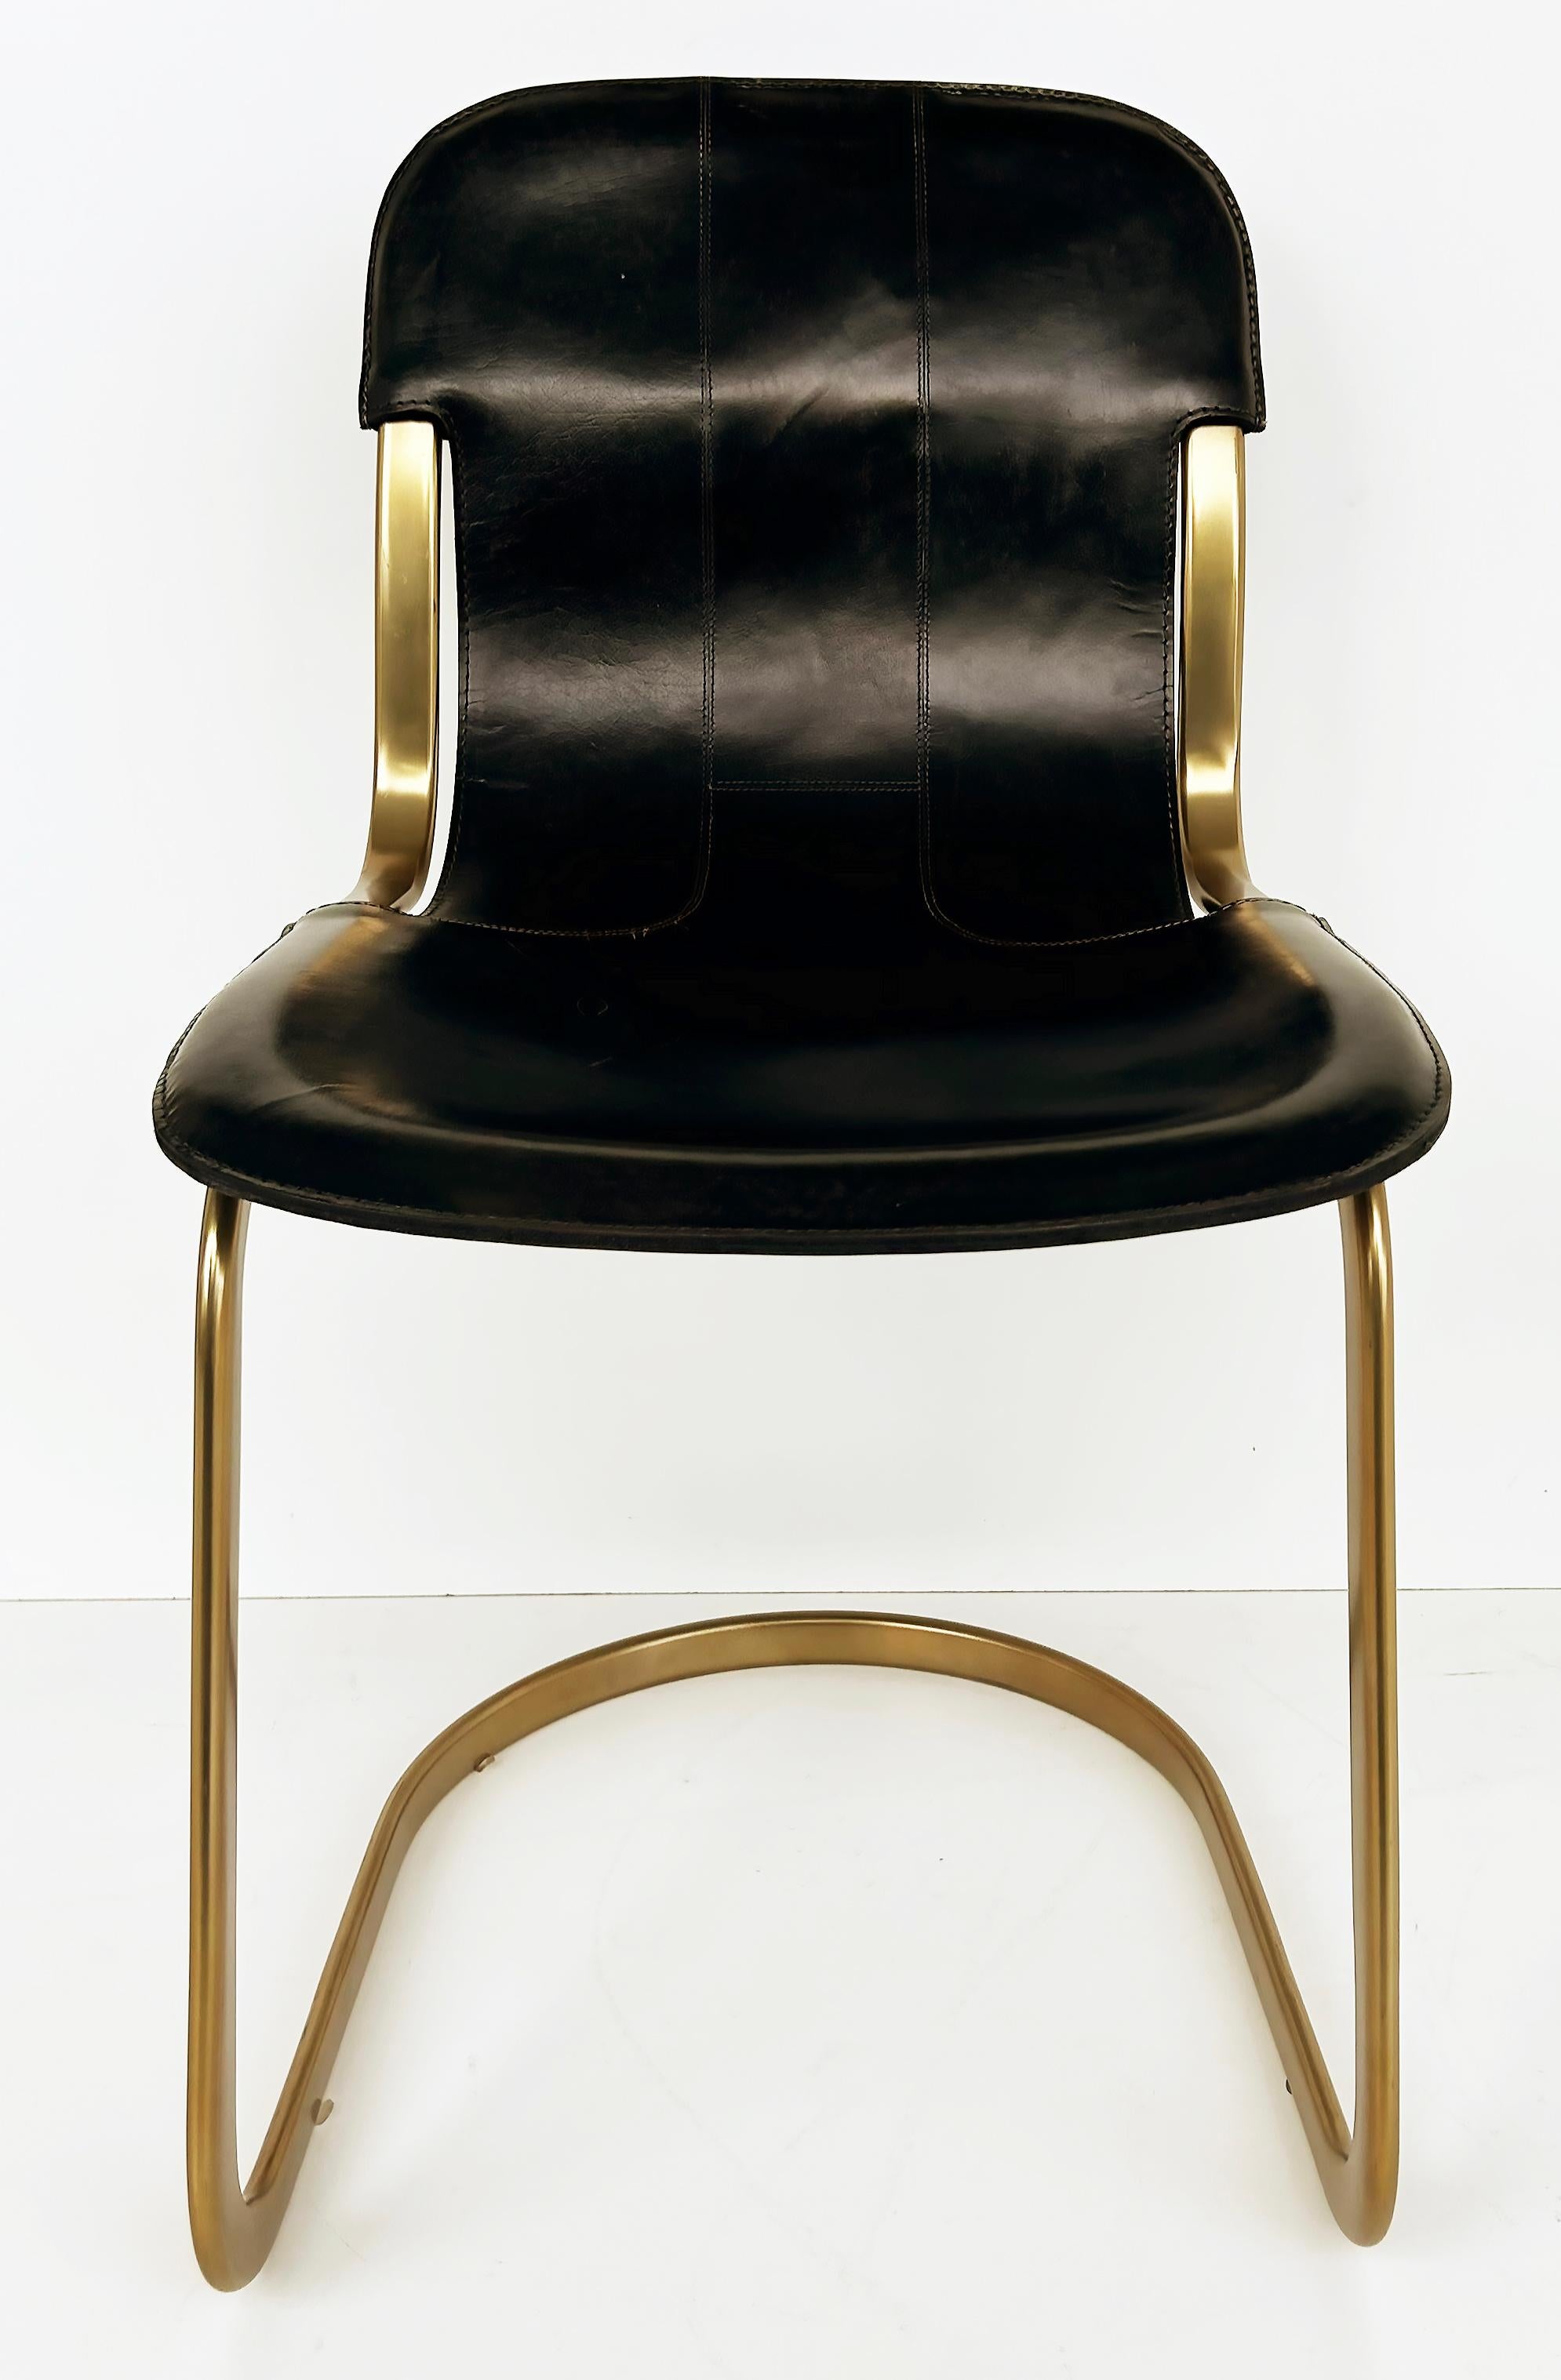 Brass Plated Leather Cantilevered Dining Chairs After Willy Rizzo Set of 6

Offered for sale is a set of six brass plated and stitched leather cantilevered dining chairs after a Mid-century Modern design by Willy Rizzo. The chairs have a great look